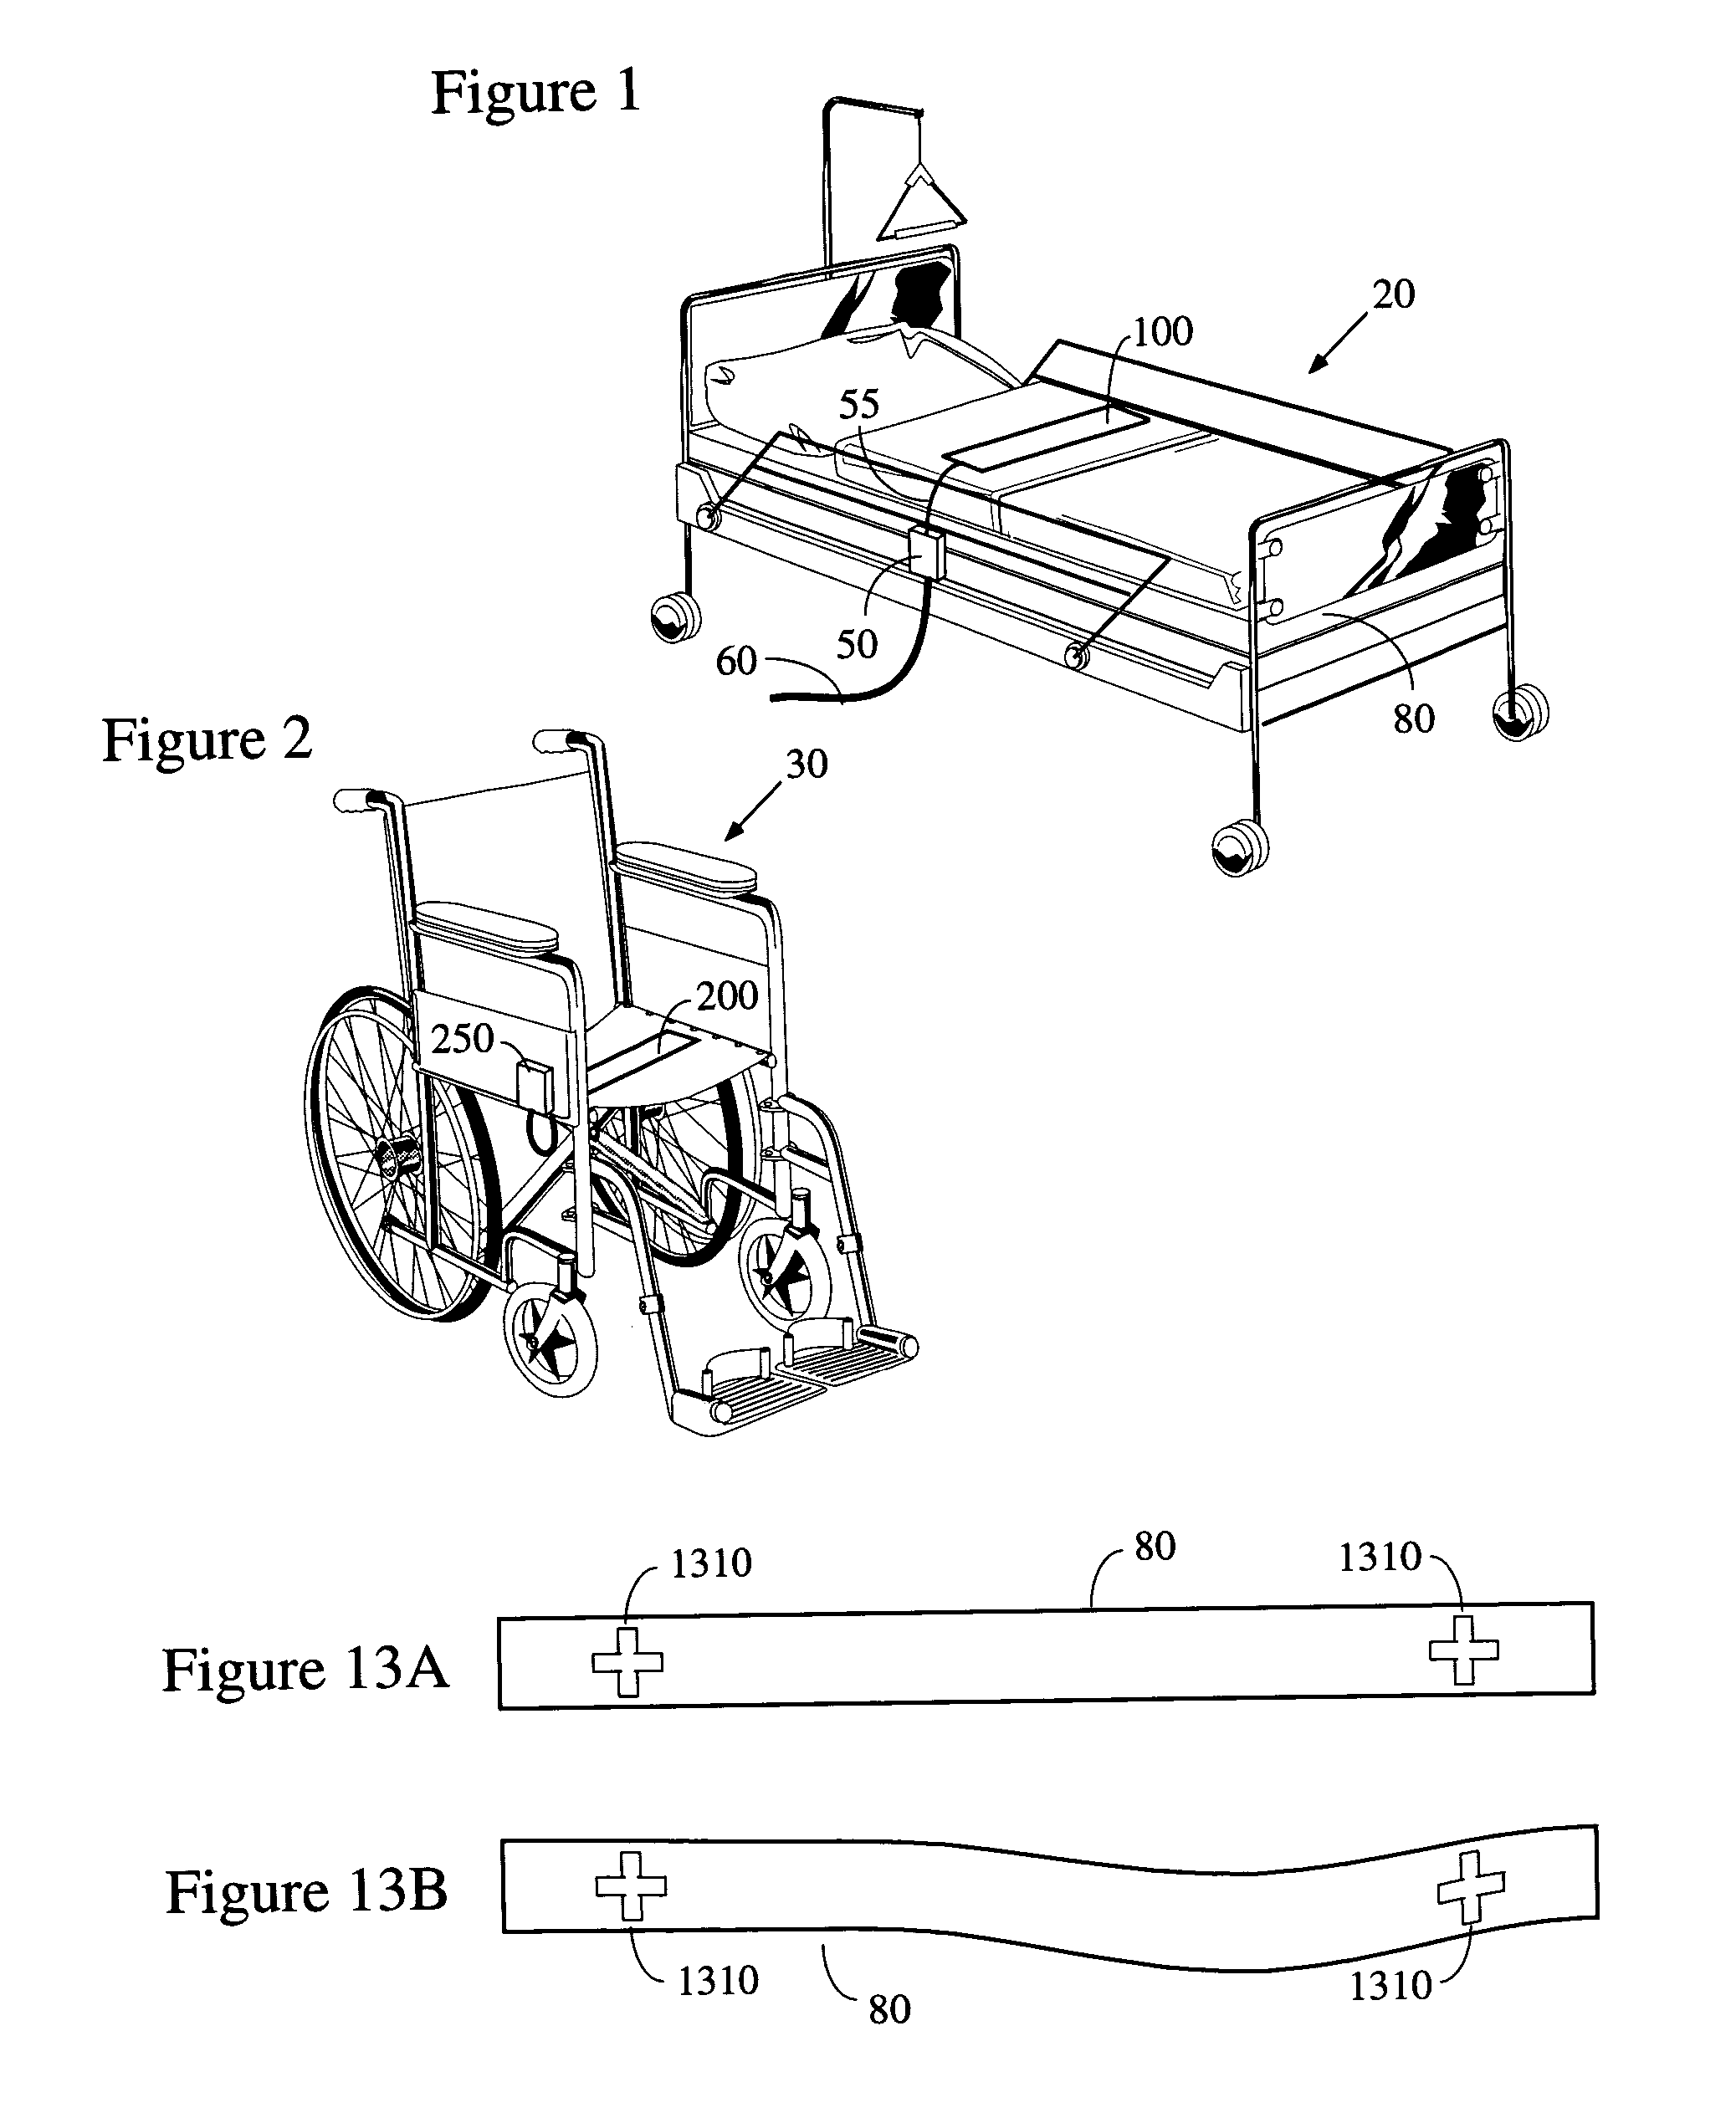 Apparatus and method for reducing the risk of decubitus ulcers